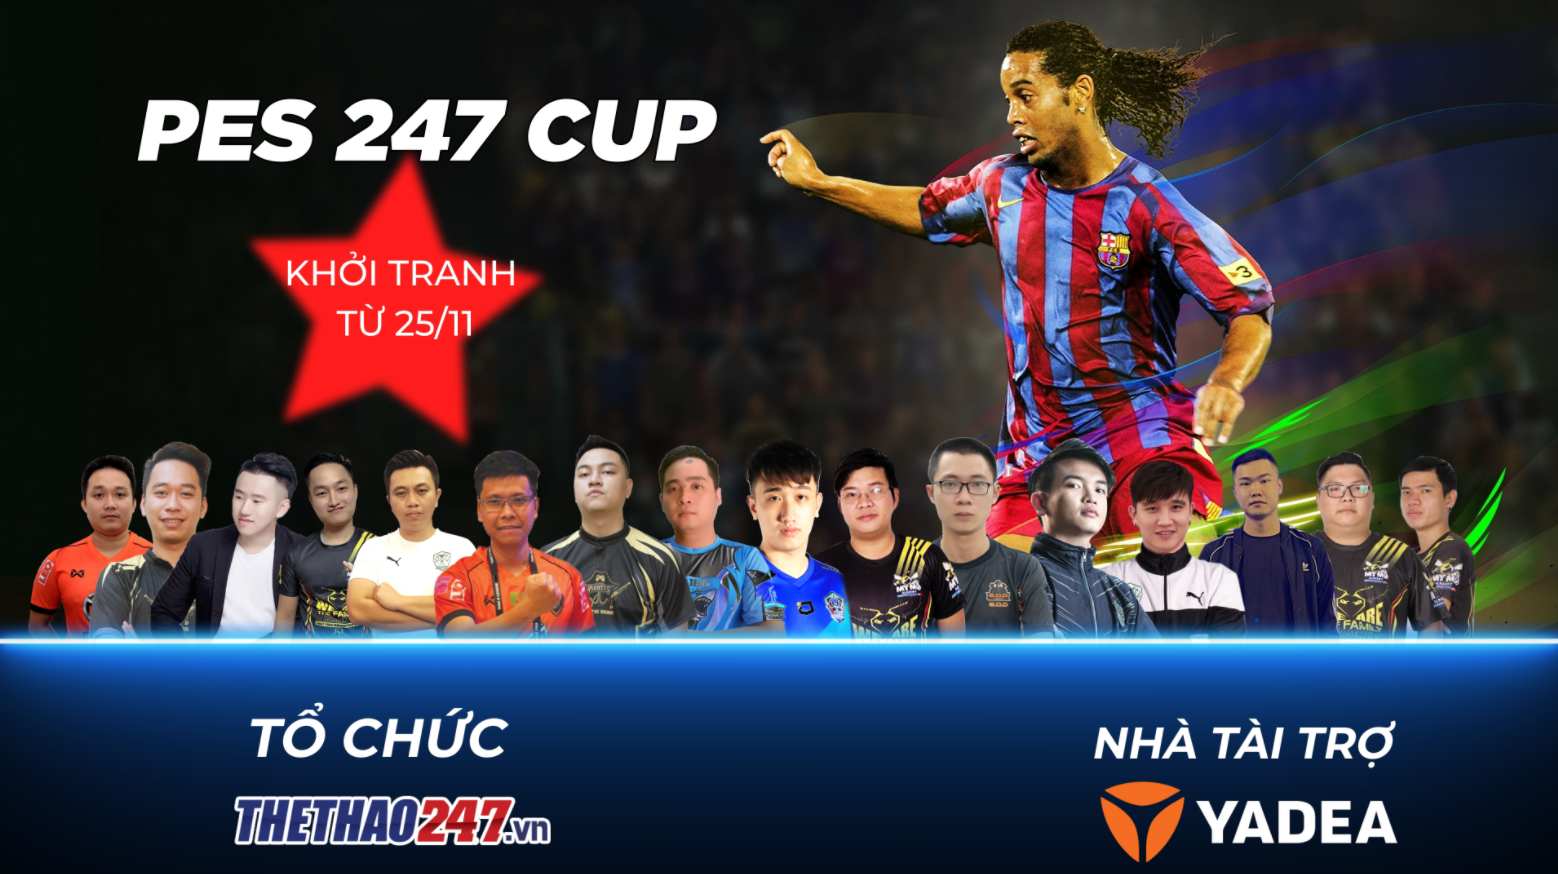 PES 247 CUP, PES 2020, eFootball 2020, Thể Thao 247